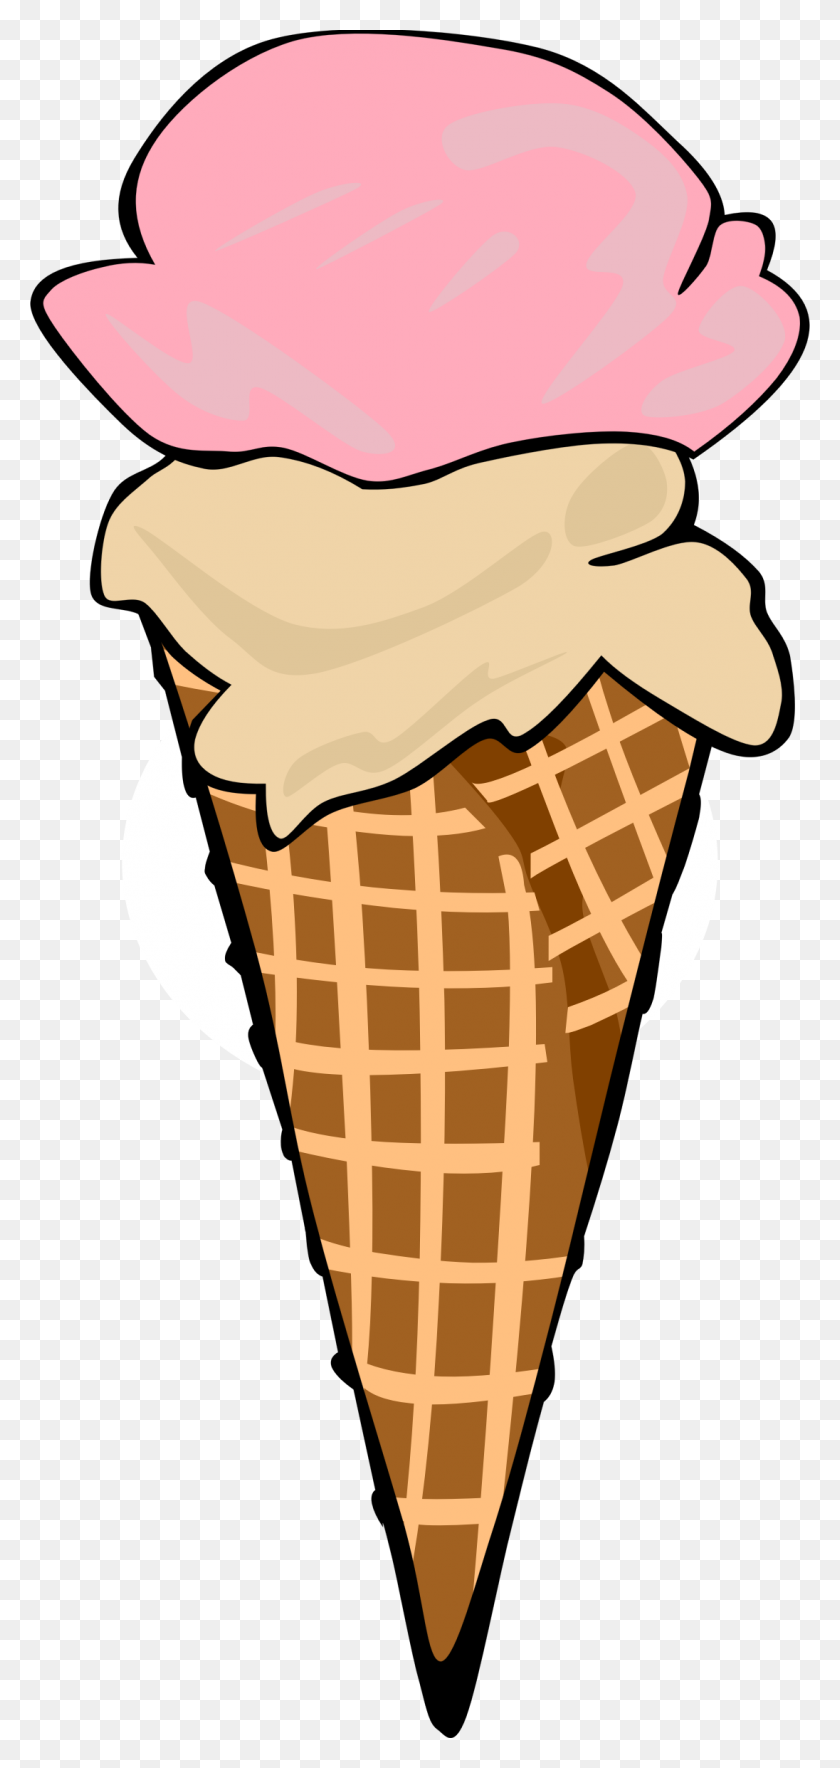 1096x2400 Fast Food, Desserts, Ice Cream Cones, Waffle, Double Icons Png - Ice Cream Cone PNG